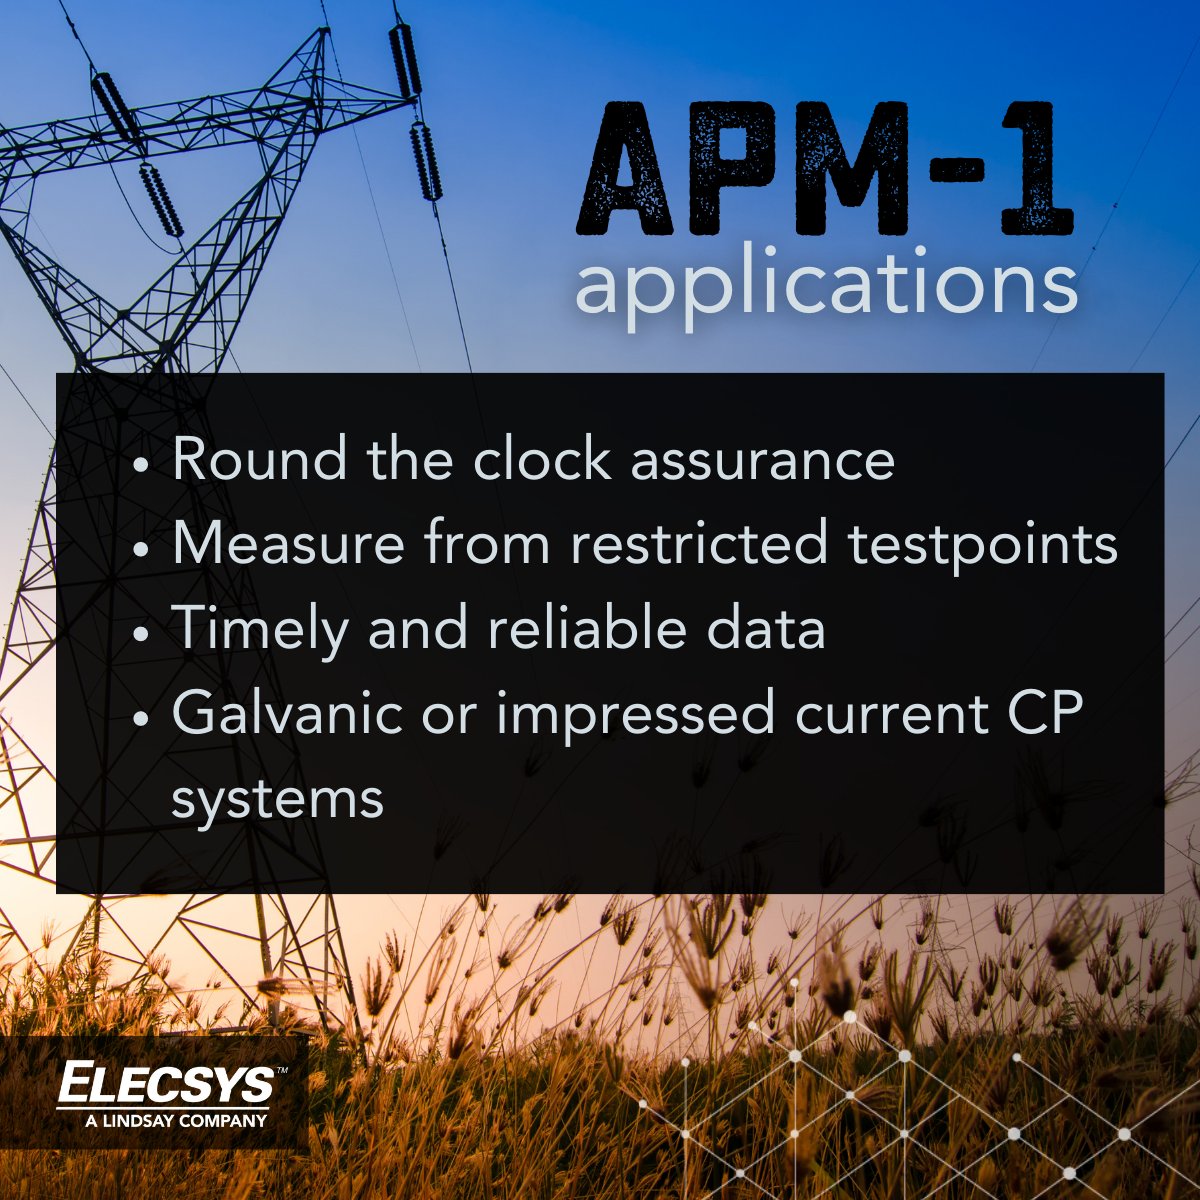 Did we mention 10 years of comms fees included?

Check out all the APM-1 applications here: bit.ly/3D5wQ9Z

#remotemonitoring #compliance #cpregulations #complianceregulations #iot #iiot #pipelineintegrity #economical #apm1 #elecsys